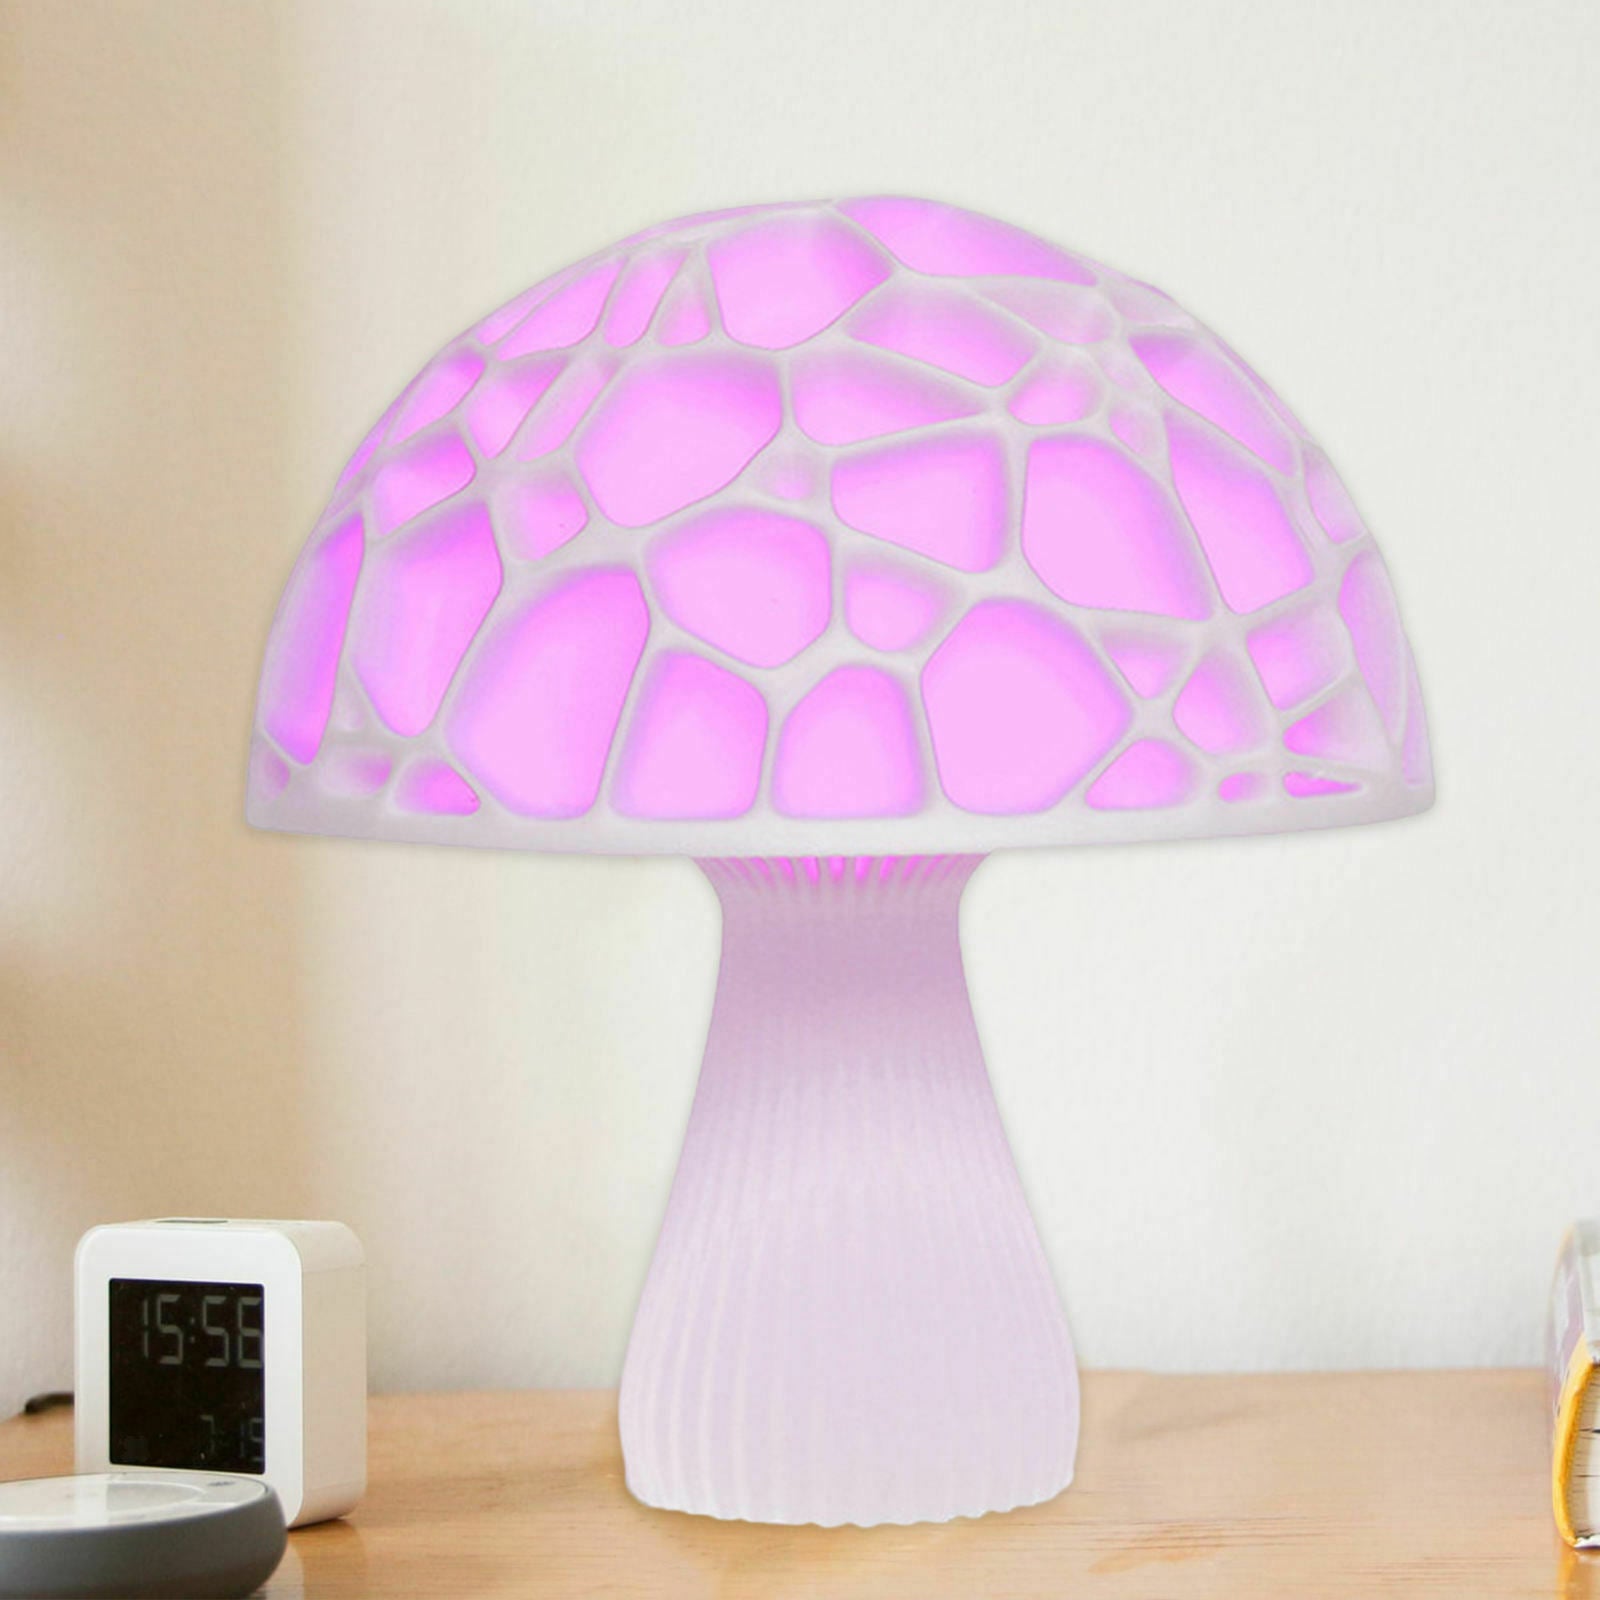 Table Lamp Remote Control Multicolor USB Rechargeable 16 Colors Night Light for